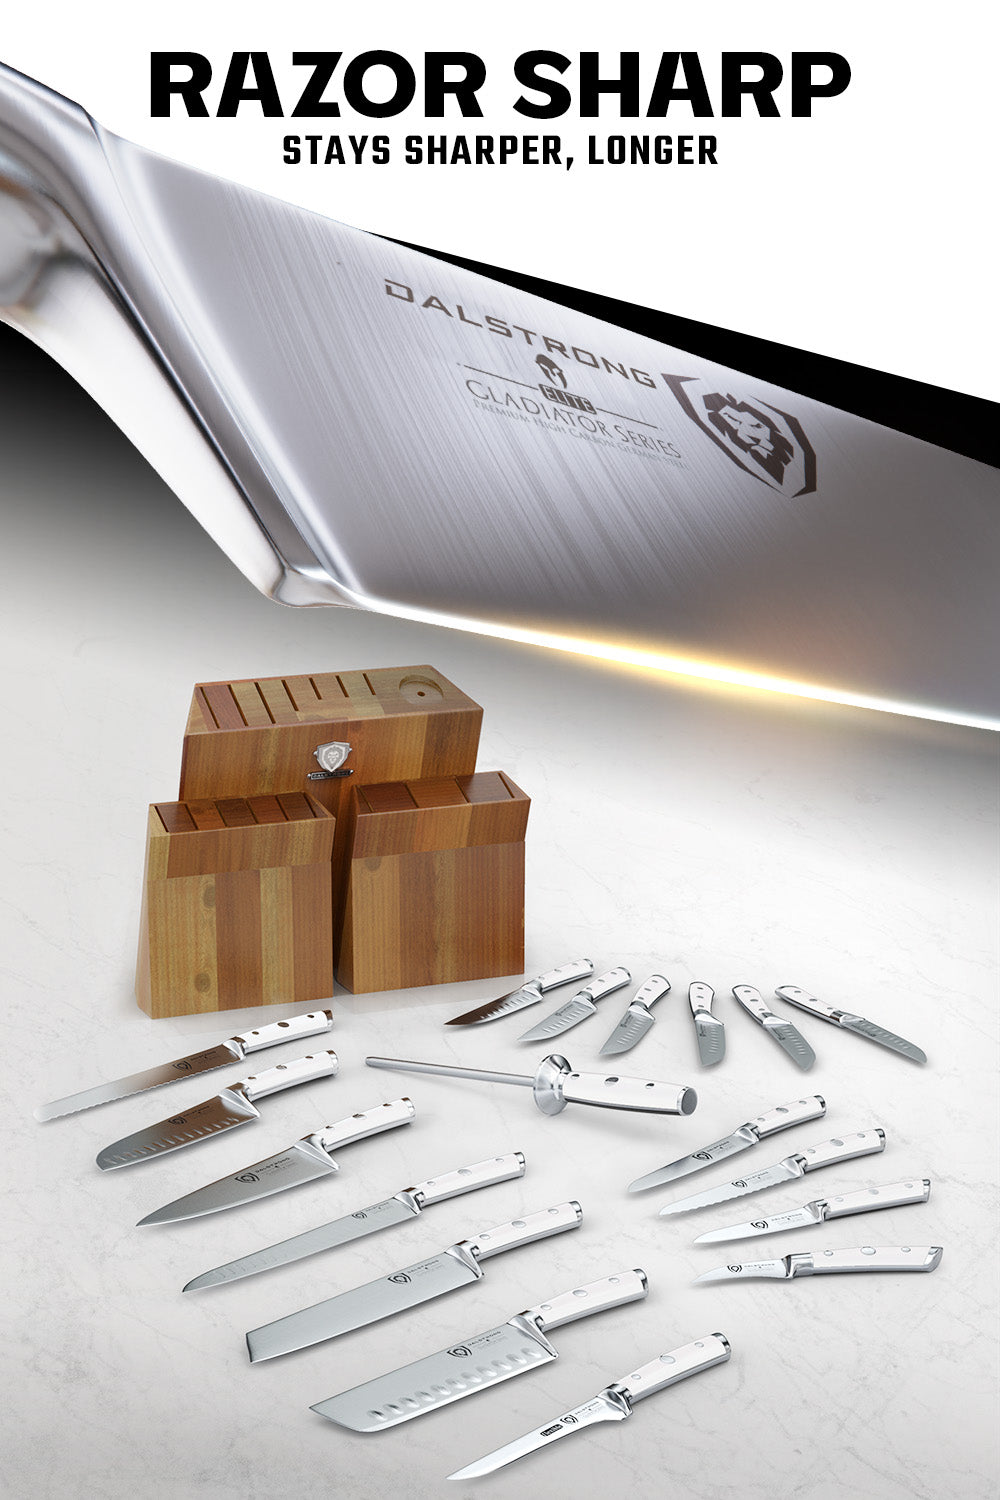 Dalstrong gladiator series 18 piece knife set with white handles and block featuring it's razor sharp blade.